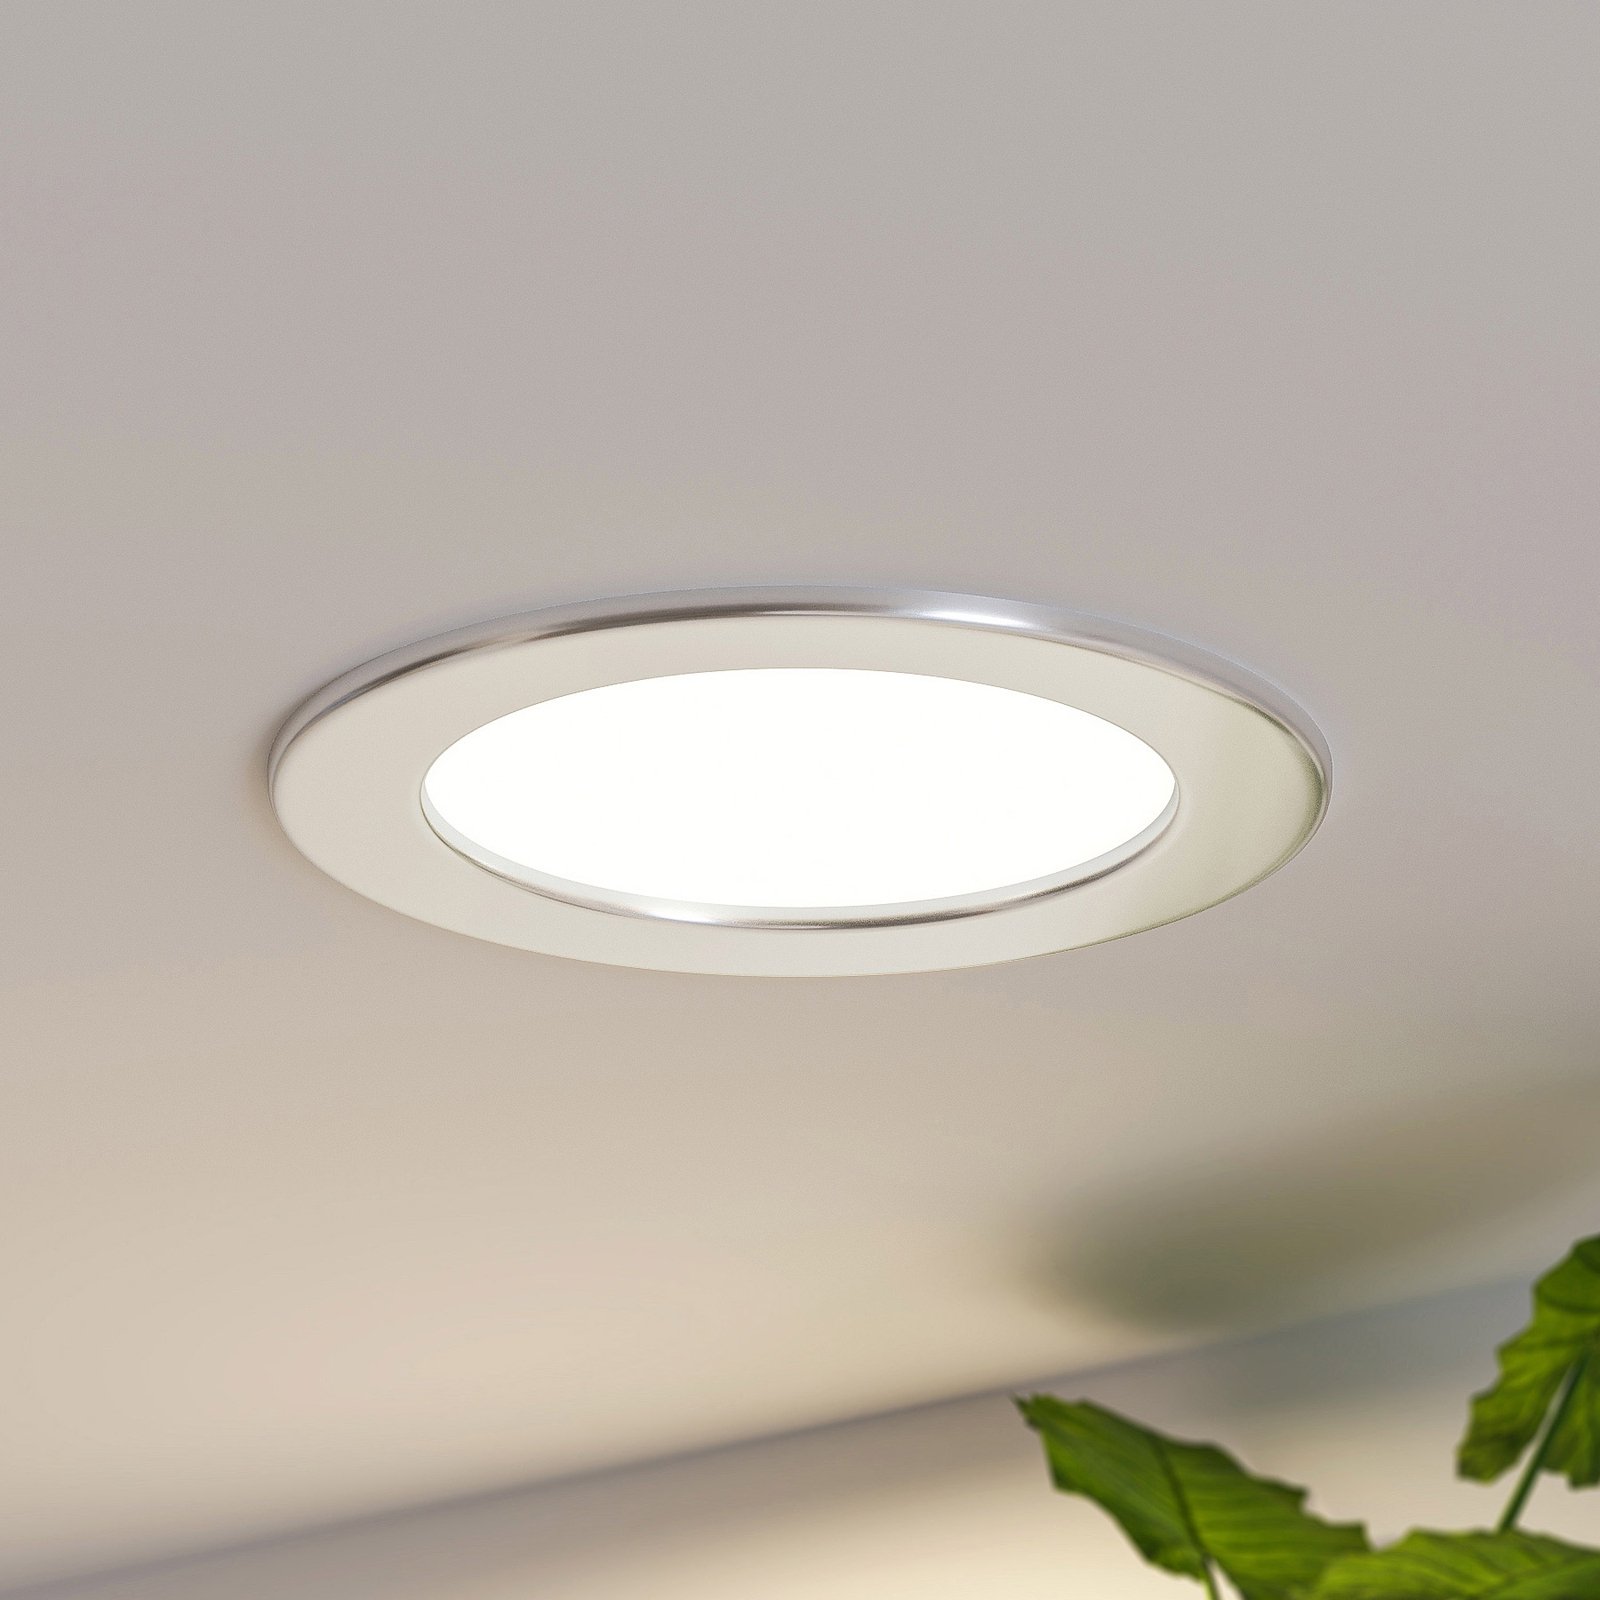 Prios LED recessed light Cadance, silver, 17 cm, dimmable